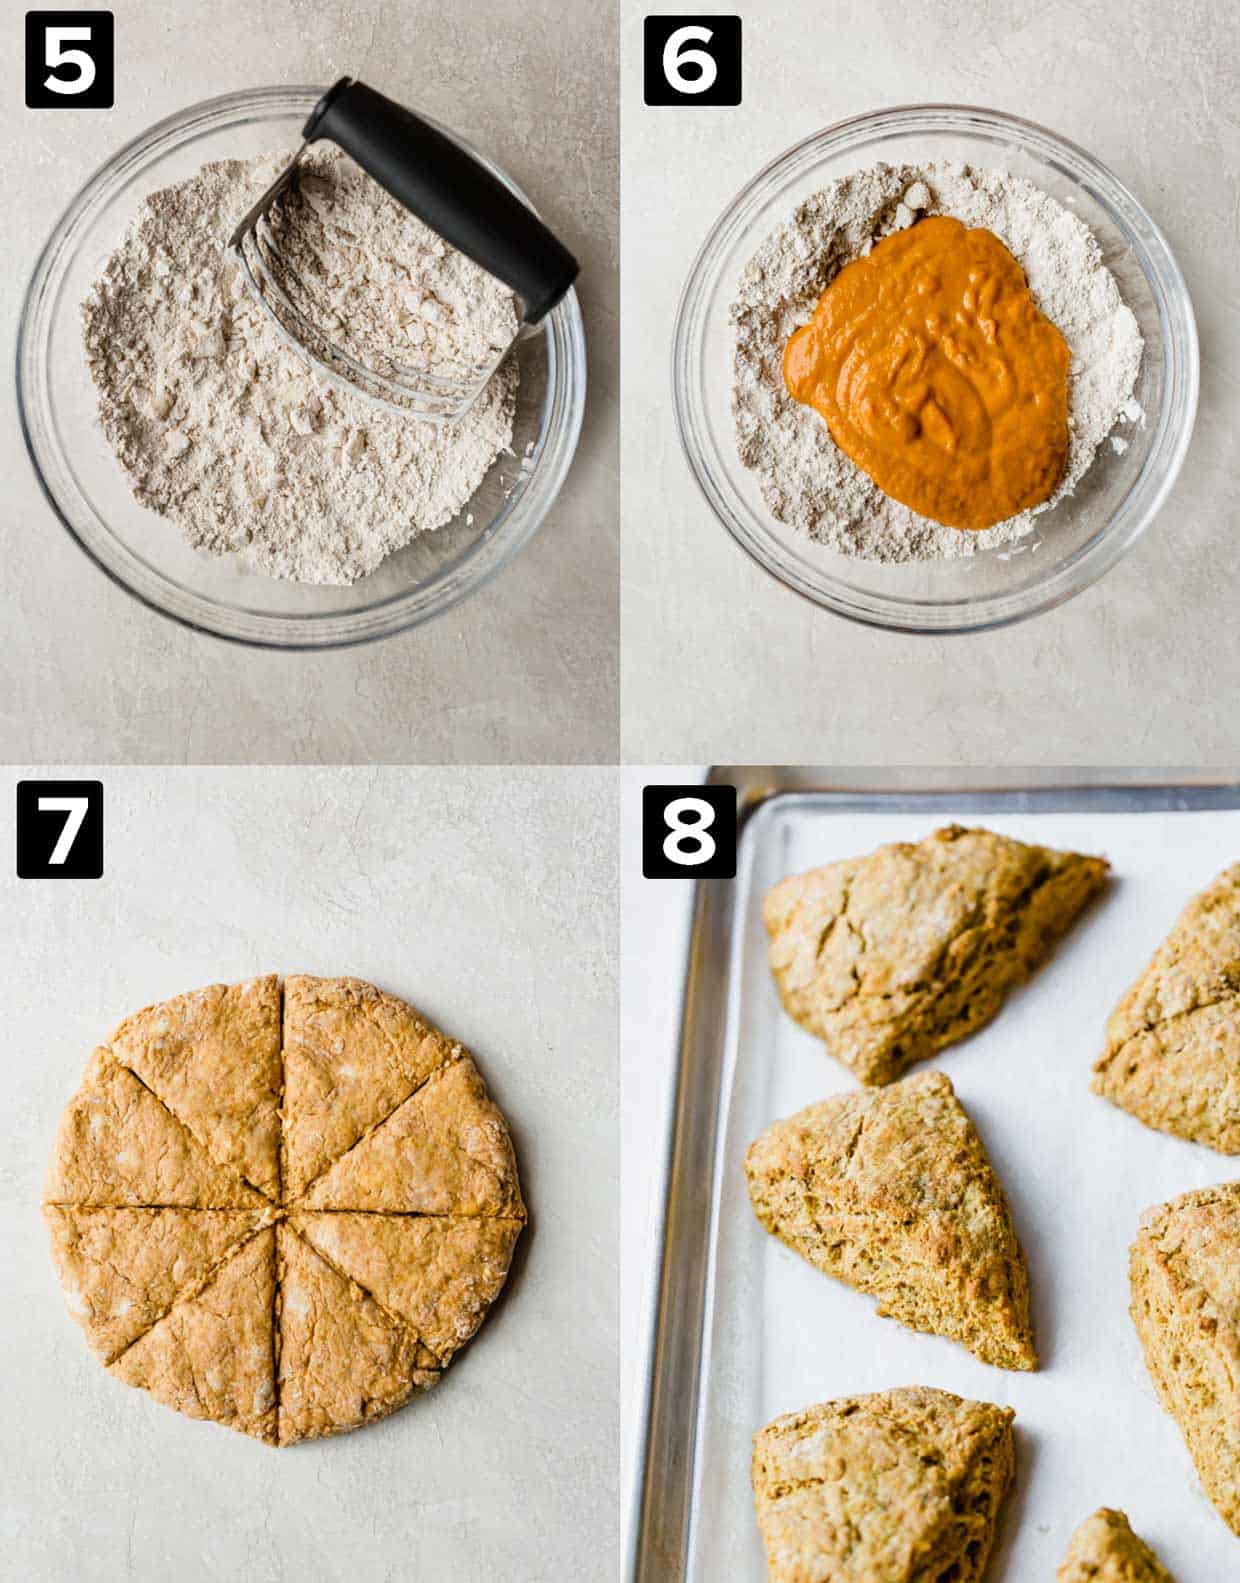 Four phot collage showing the making of Glazed Pumpkin Scones, dry ingredients in a glass bowl, pumpkin puree added, pumpkin scone batter in a circle and cut into eight triangles, and baked pumpkin scones on a baking sheet.